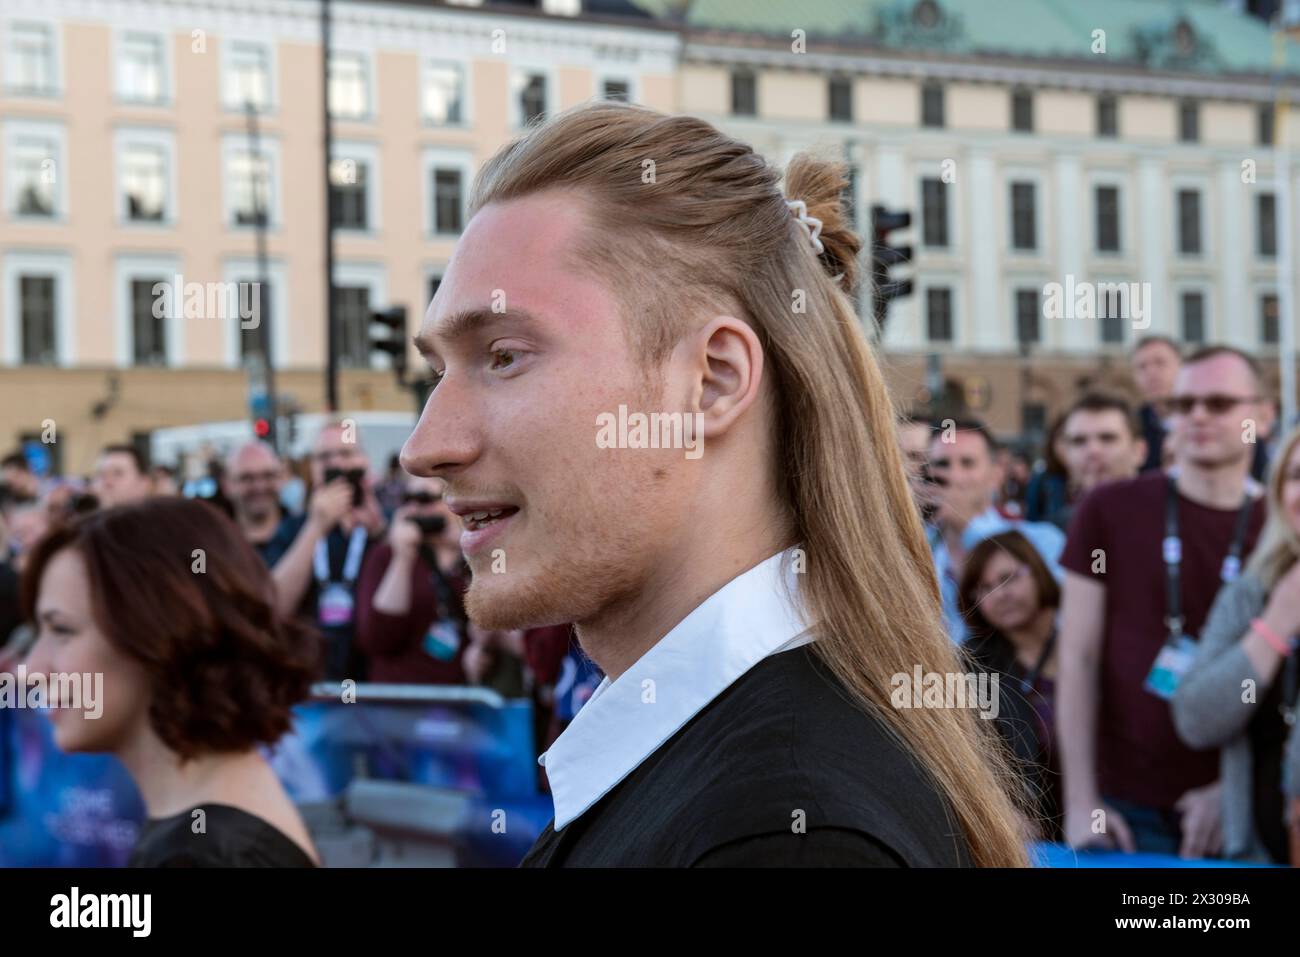 Eurovision Song Contest 2016, Stockholm, Sweden Stockholm, Sweden. 8 May. IVAN from Belarus on the red carpet for the ESC 2016. Stockholm Euroclub Sweden *** Eurovision Song Contest 2016, Stockholm, Sweden Stockholm, Sweden 8 May IVAN from Belarus on the red carpet for the ESC 2016 Stockholm Euroclub Sweden Stock Photo